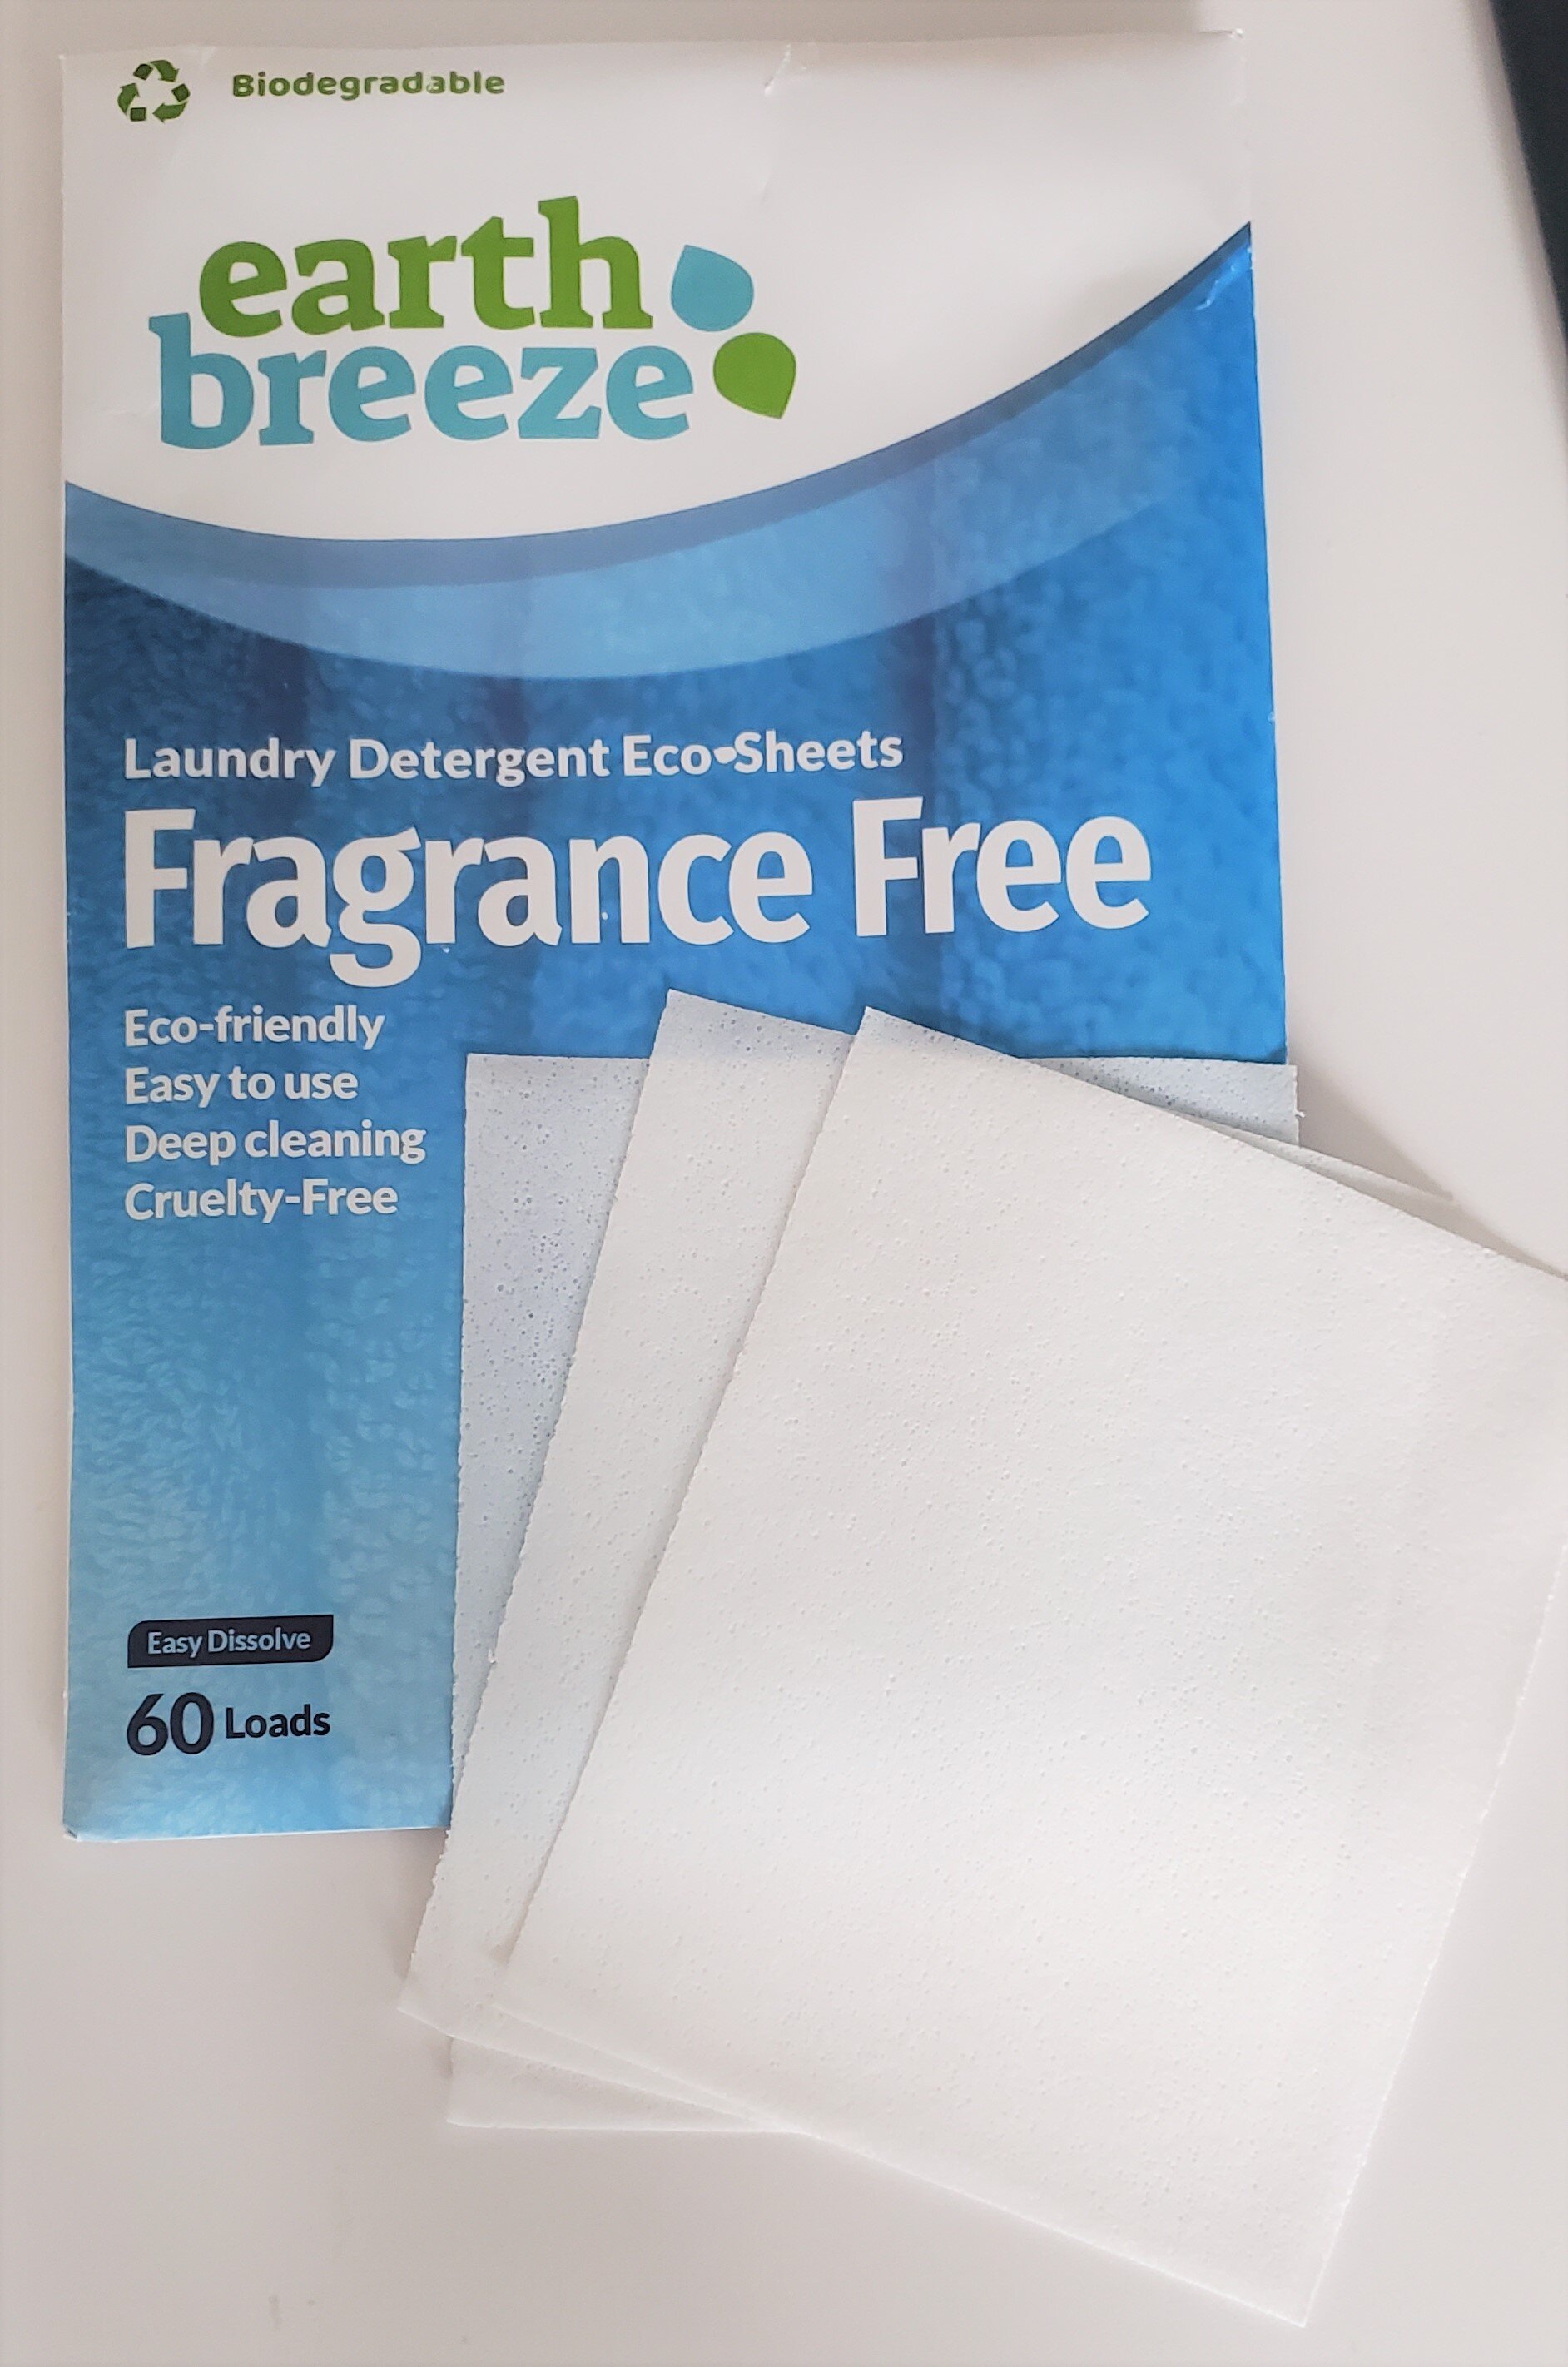 5 Reasons To Try Earth Breeze Laundry Detergent Eco Sheets - All